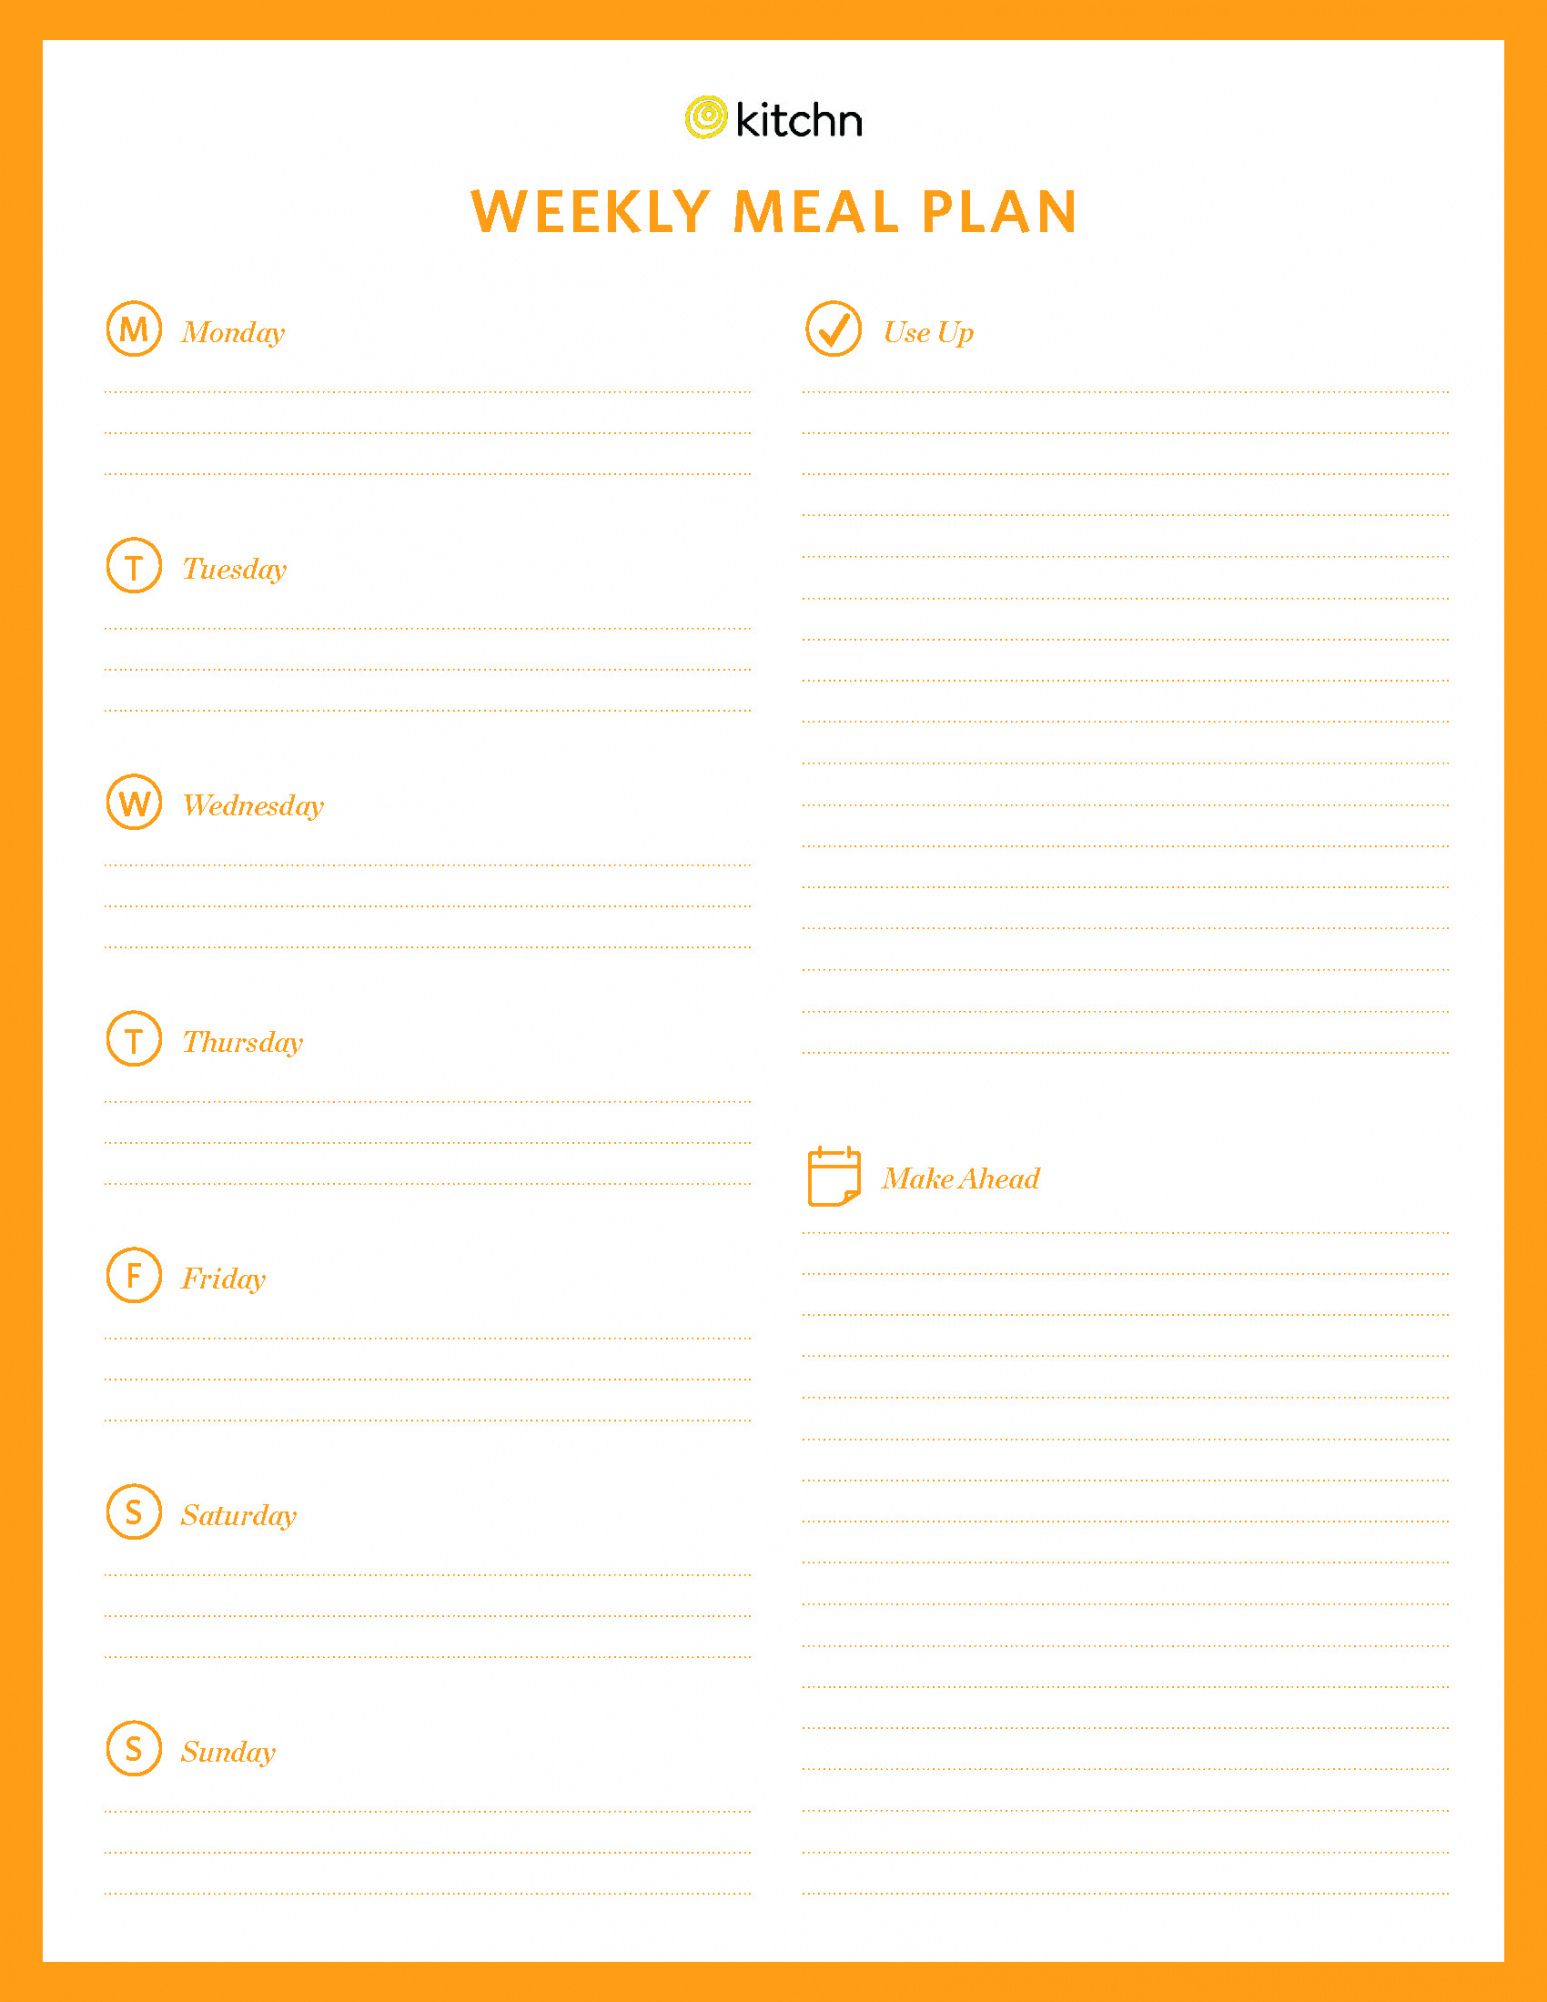 free kitchn's meal plan template  kitchn weekly food menu template example